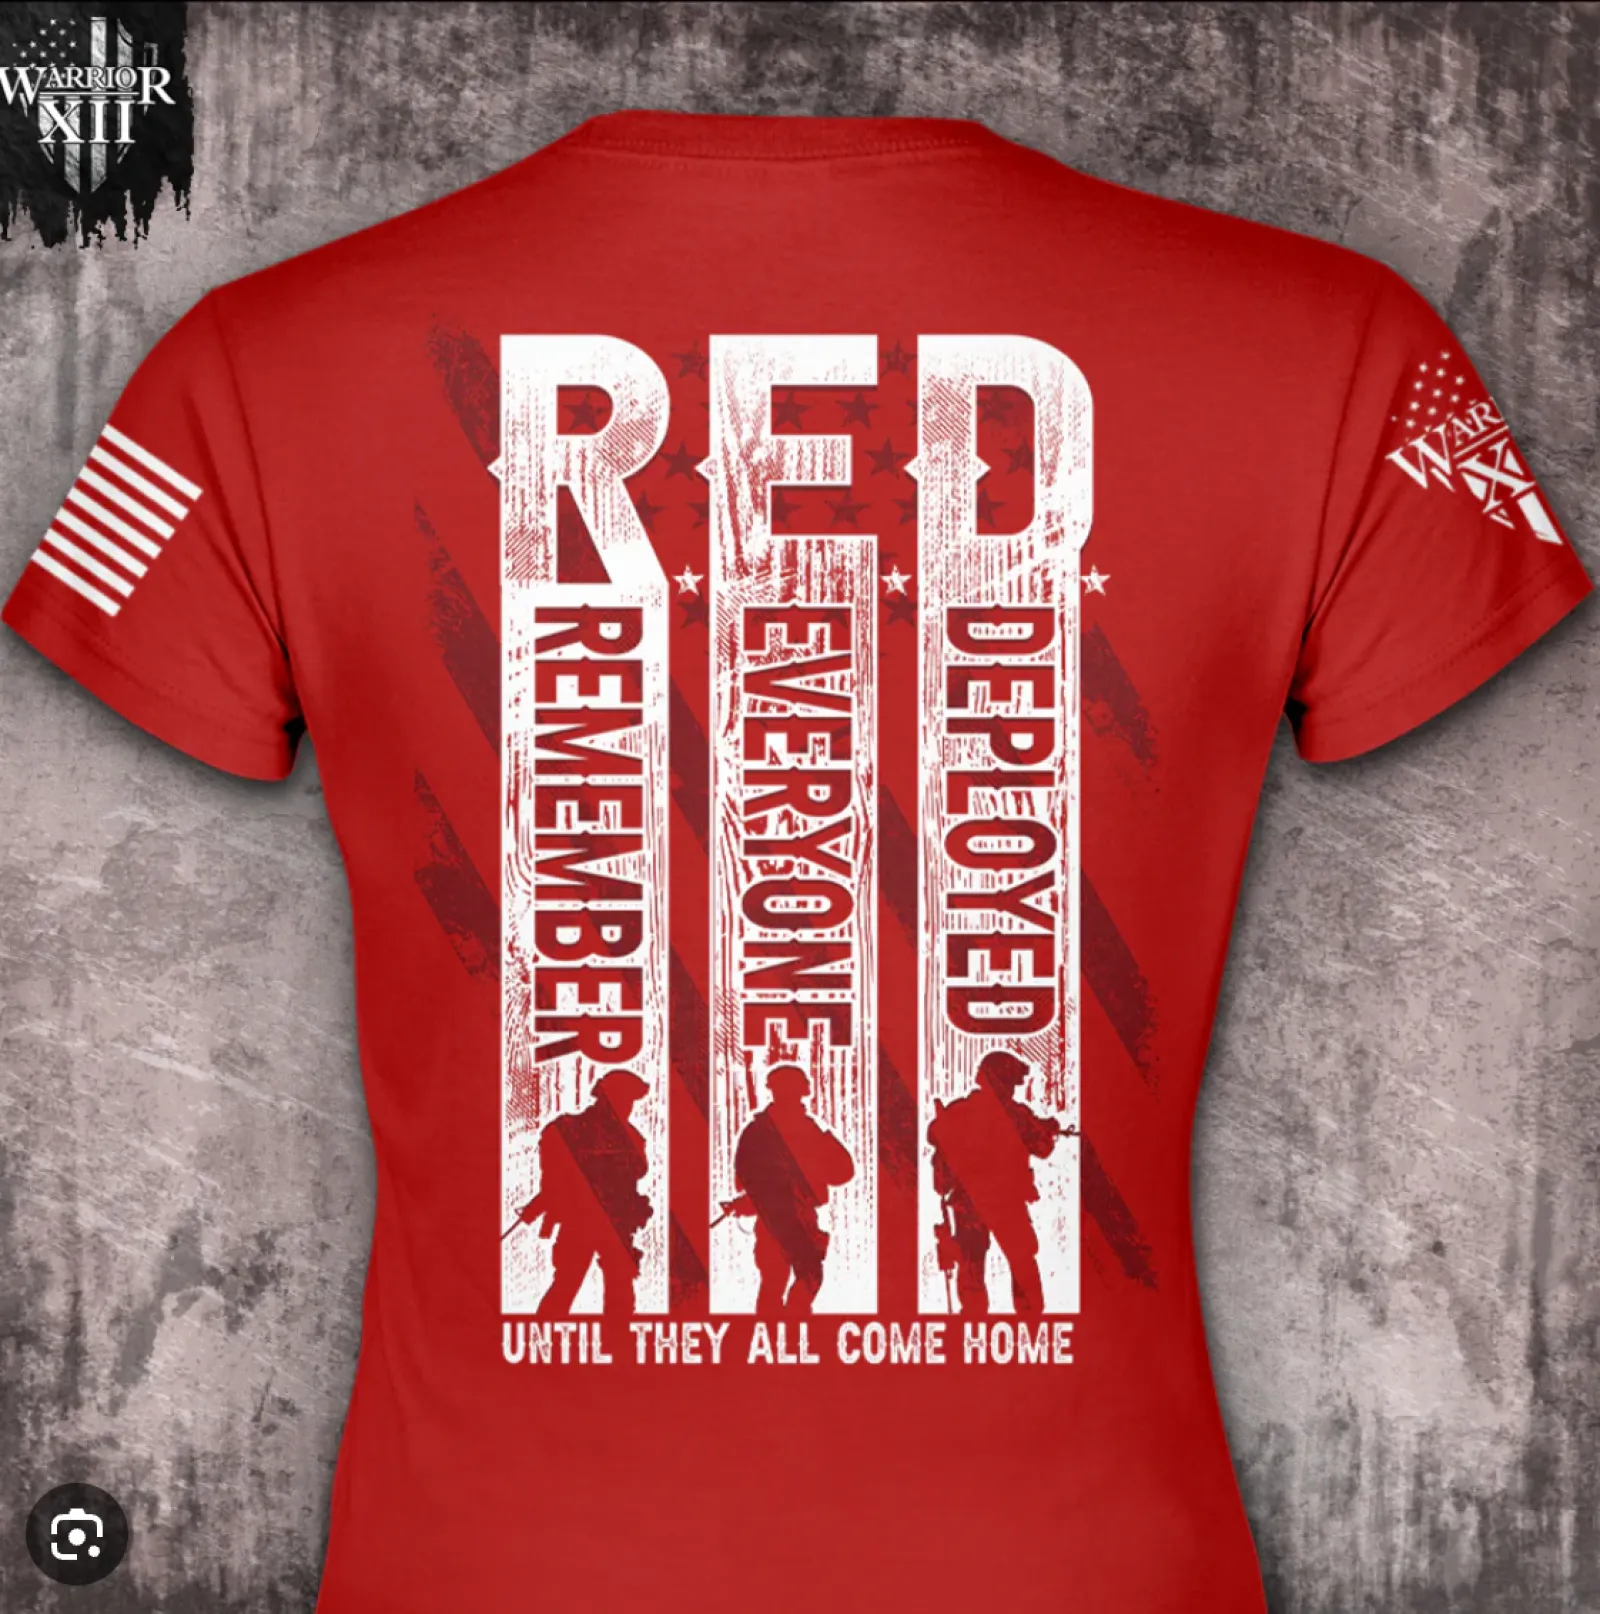 a red shirt with white text